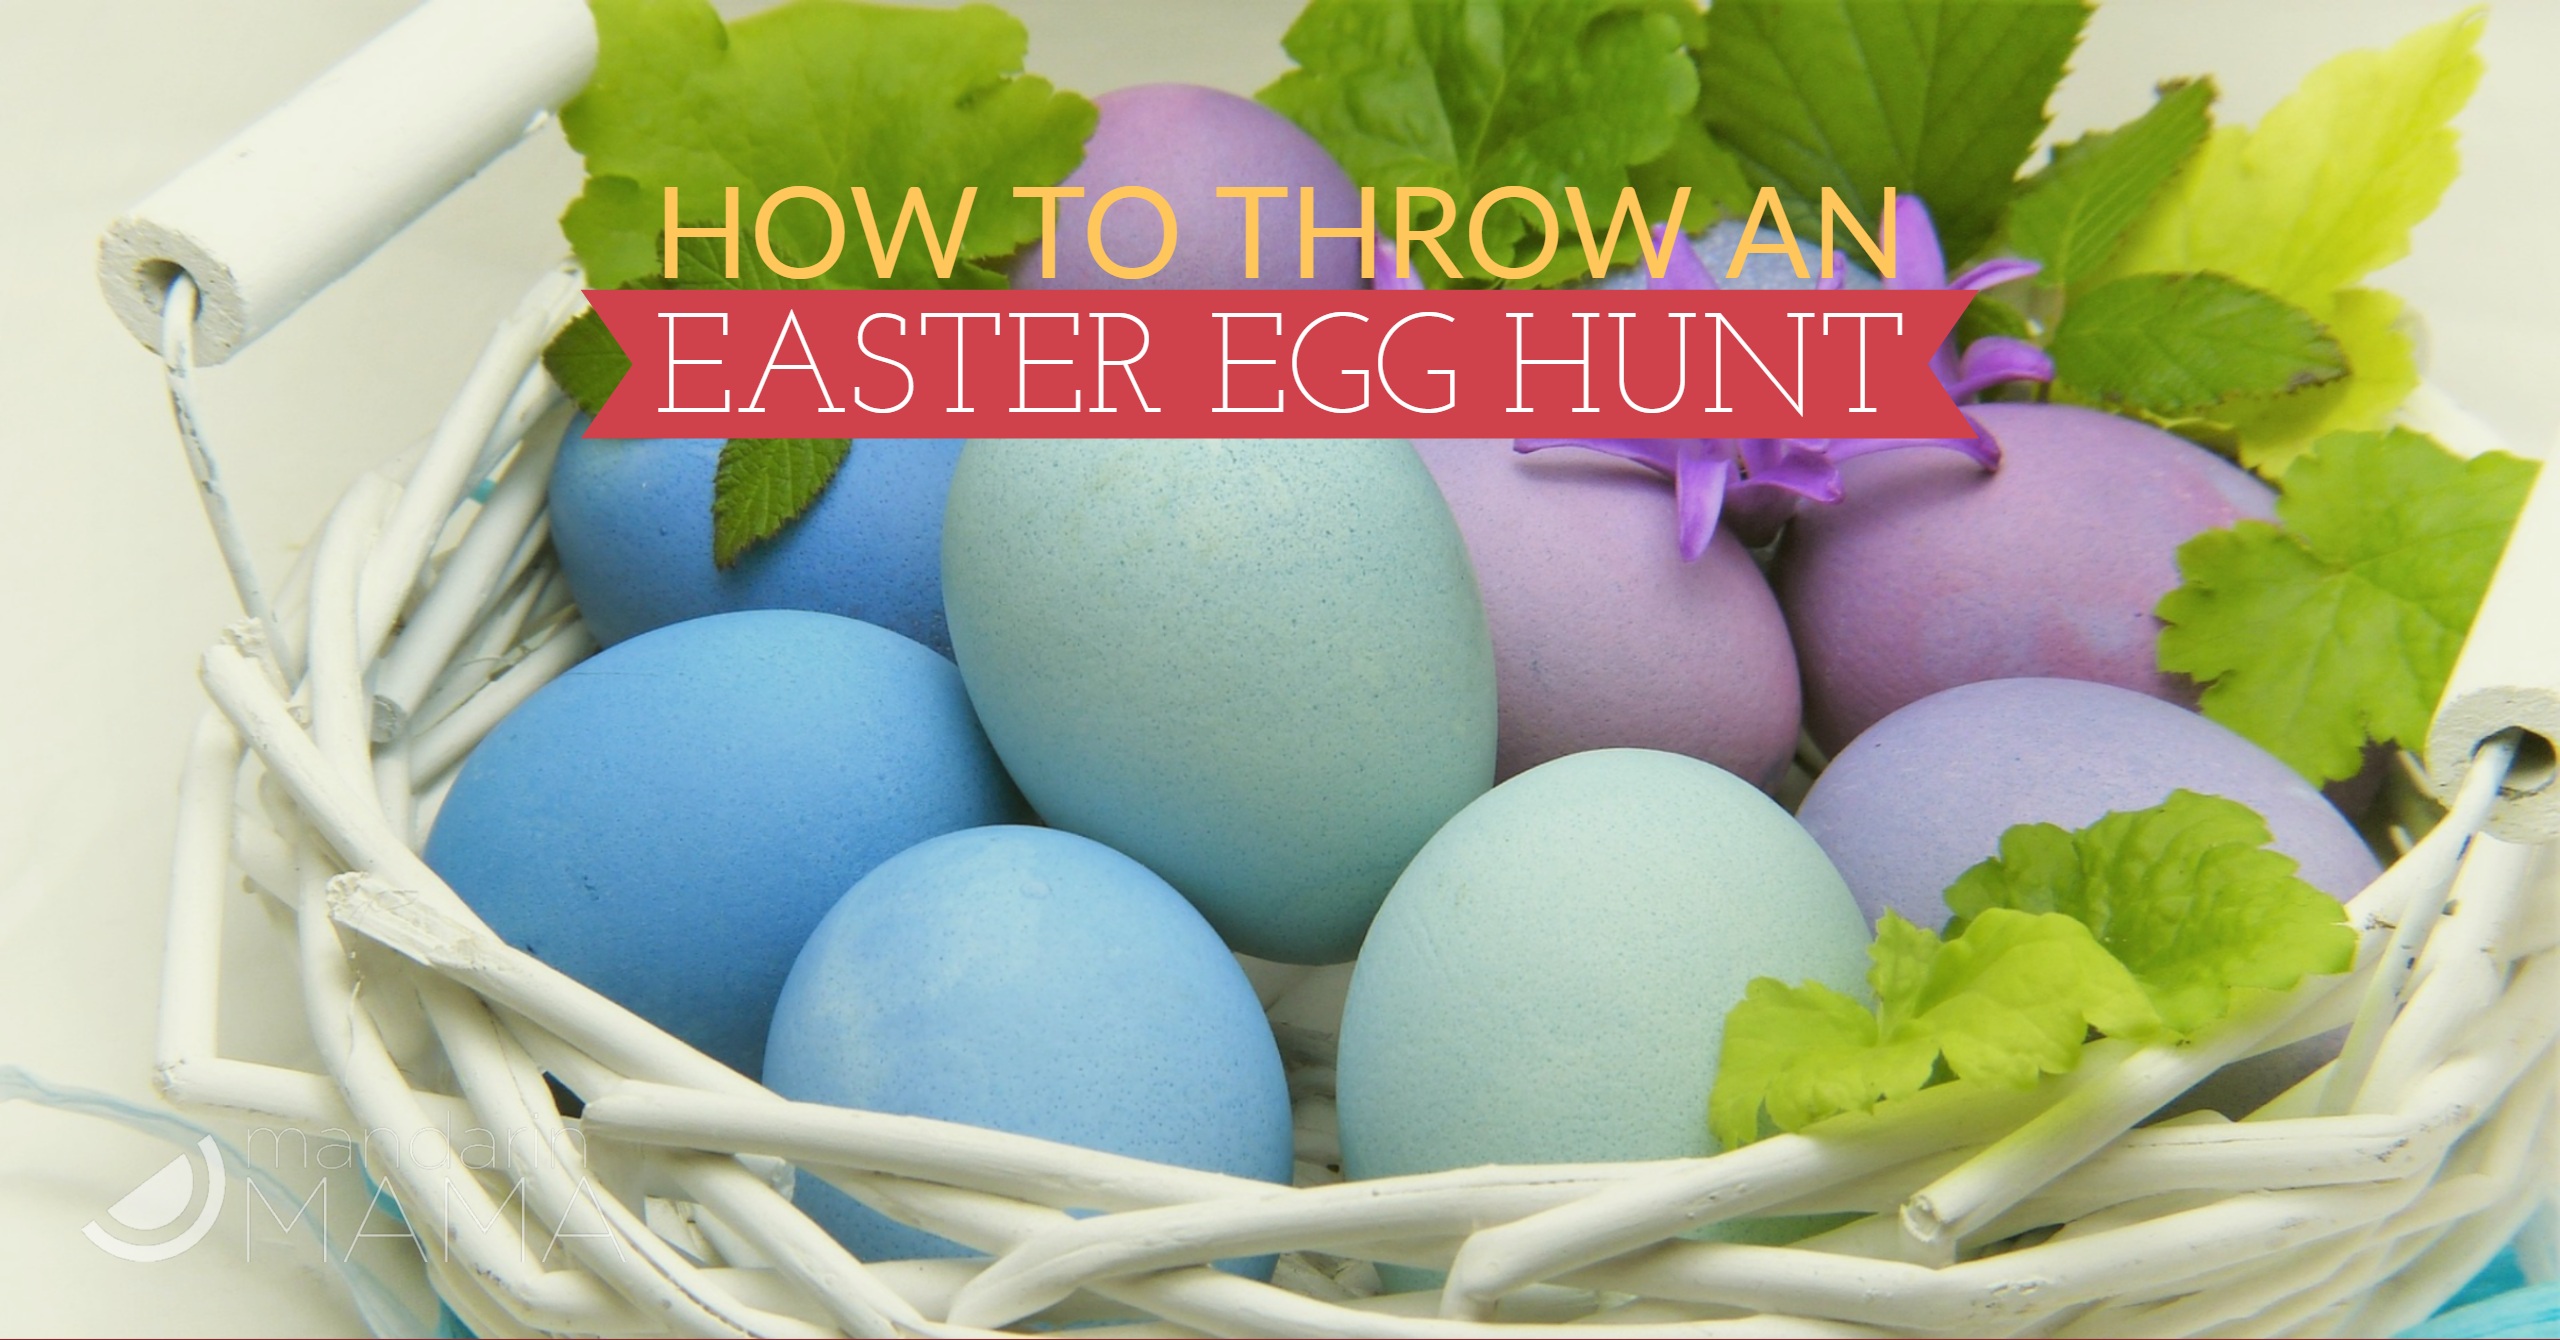 How to Throw an Easter Egg Hunt